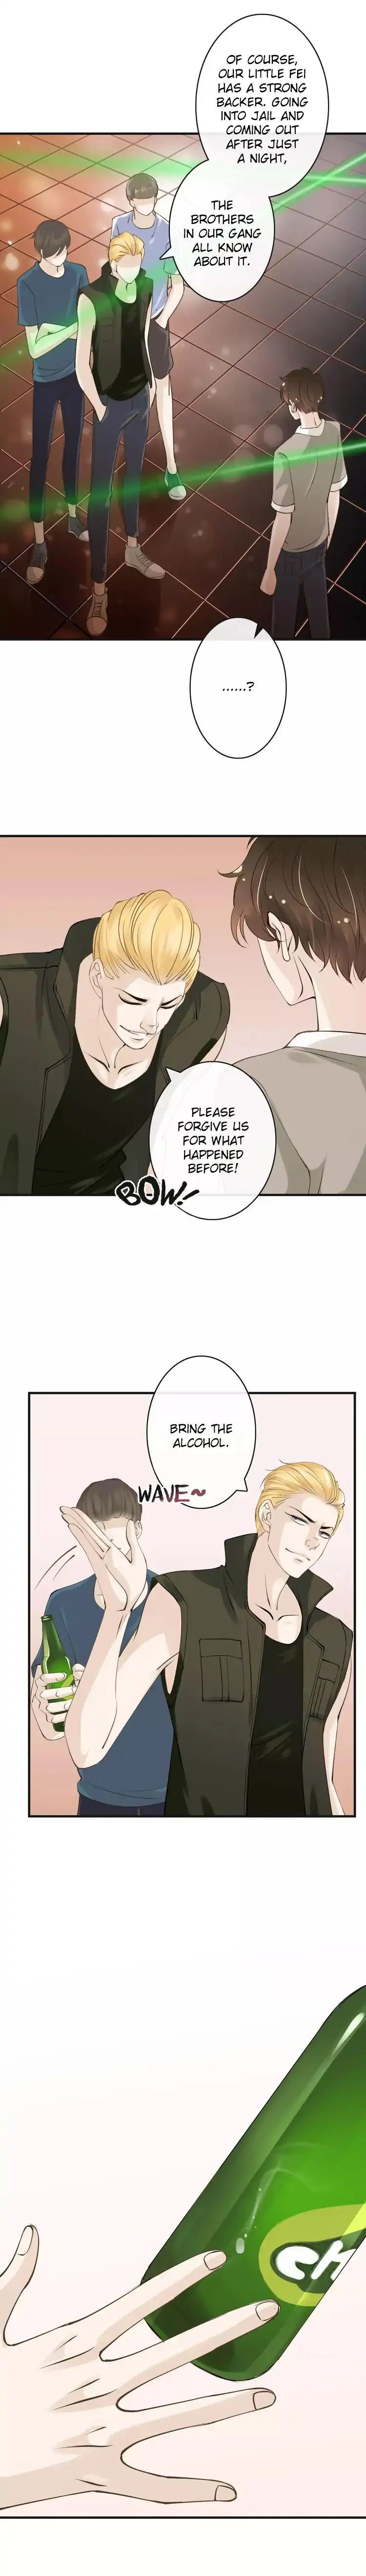 Angel Love Chapter 9 page 8